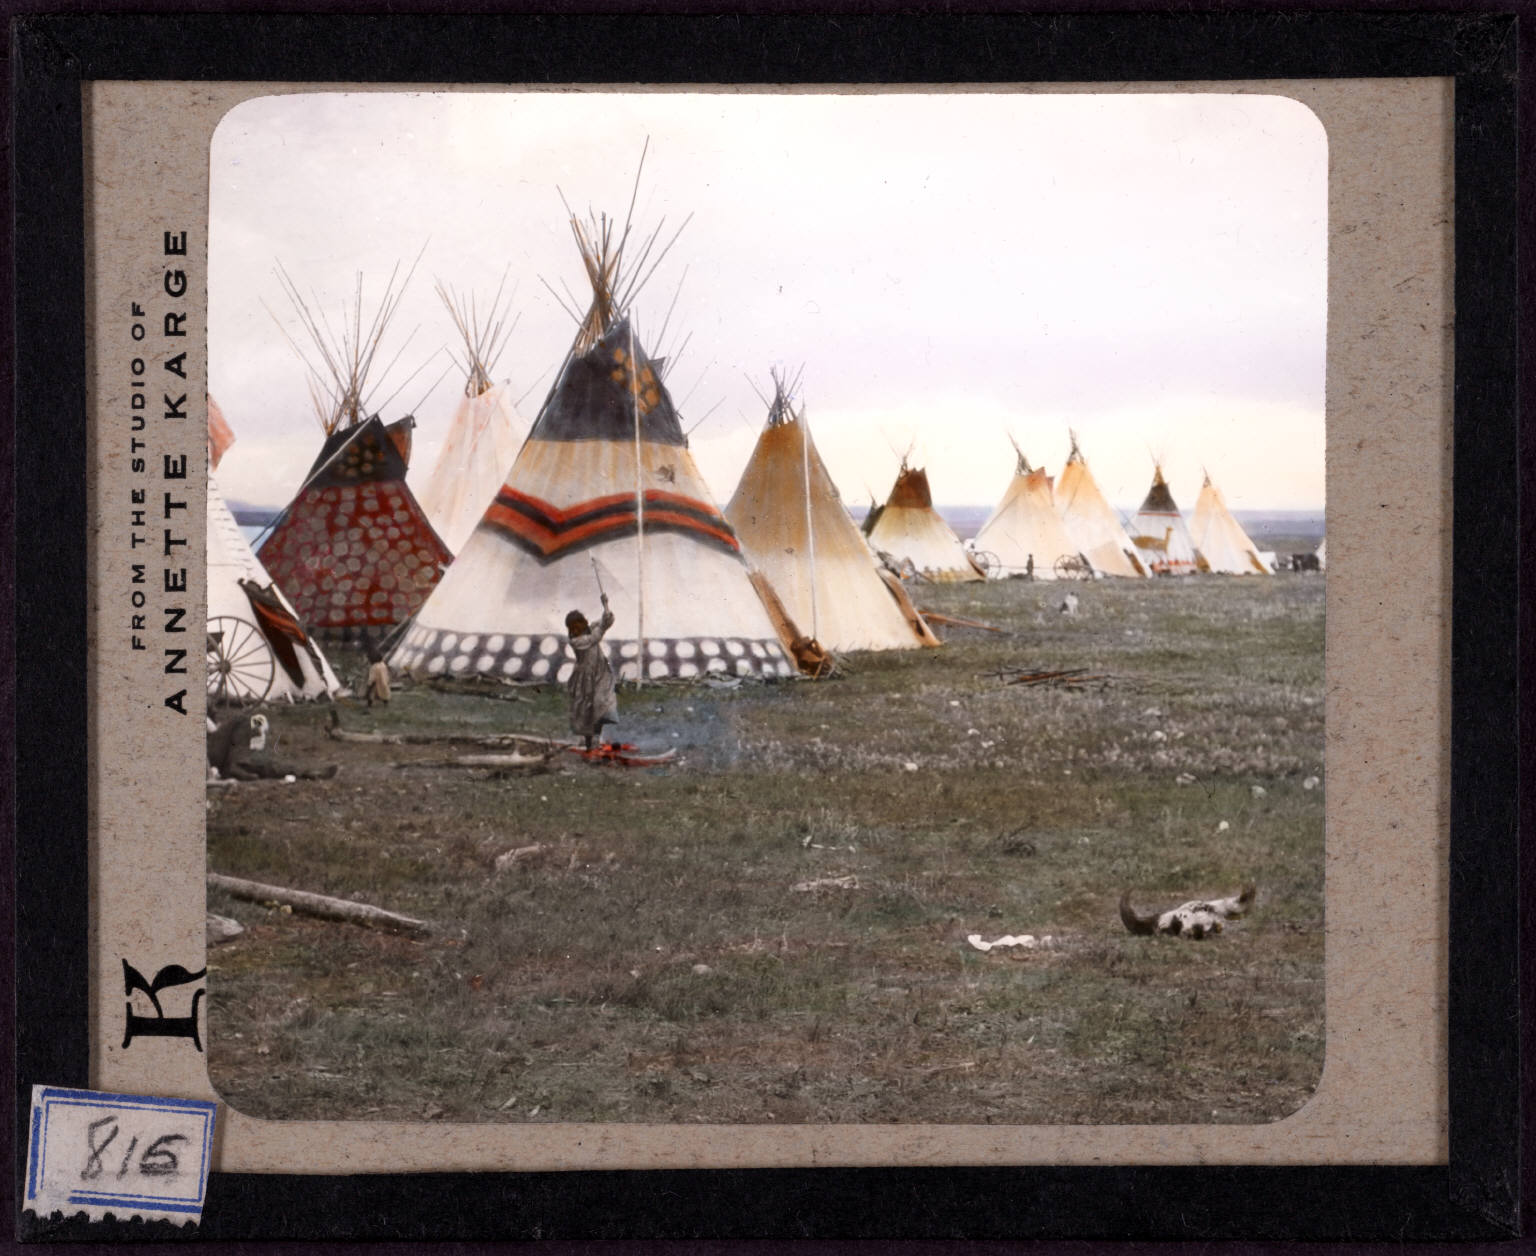 http://upload.wikimedia.org/wikipedia/commons/8/80/-Woman_chopping_firewood%2C_Eagle_tipi_in_foreground%2C_Star_tipi_on_left-._815.jpg